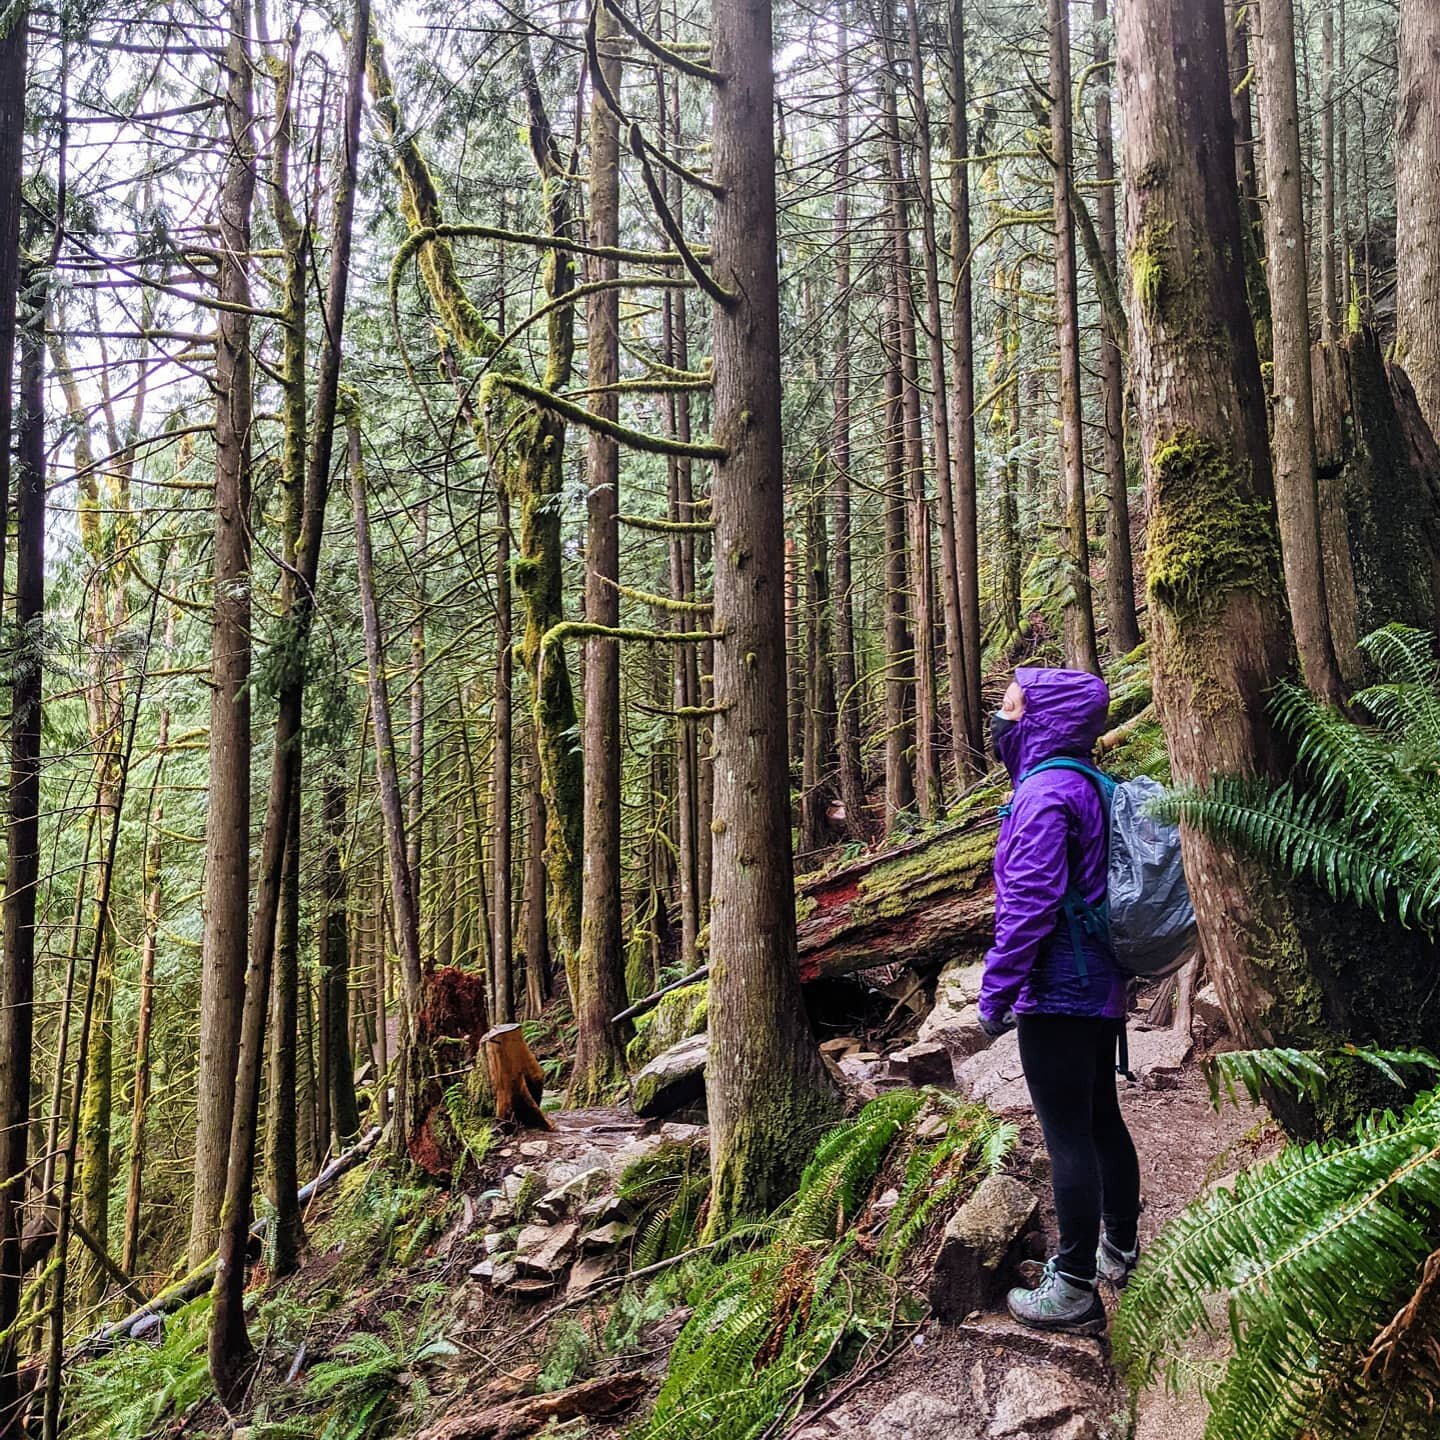 I accidentally wrote a poem on today's #alpinetrailsbookclub hike. Trees, moss stumps, ferns, rocks, muck, and rain, rain, rain.

It was a soggy one, but lovely nonetheless.